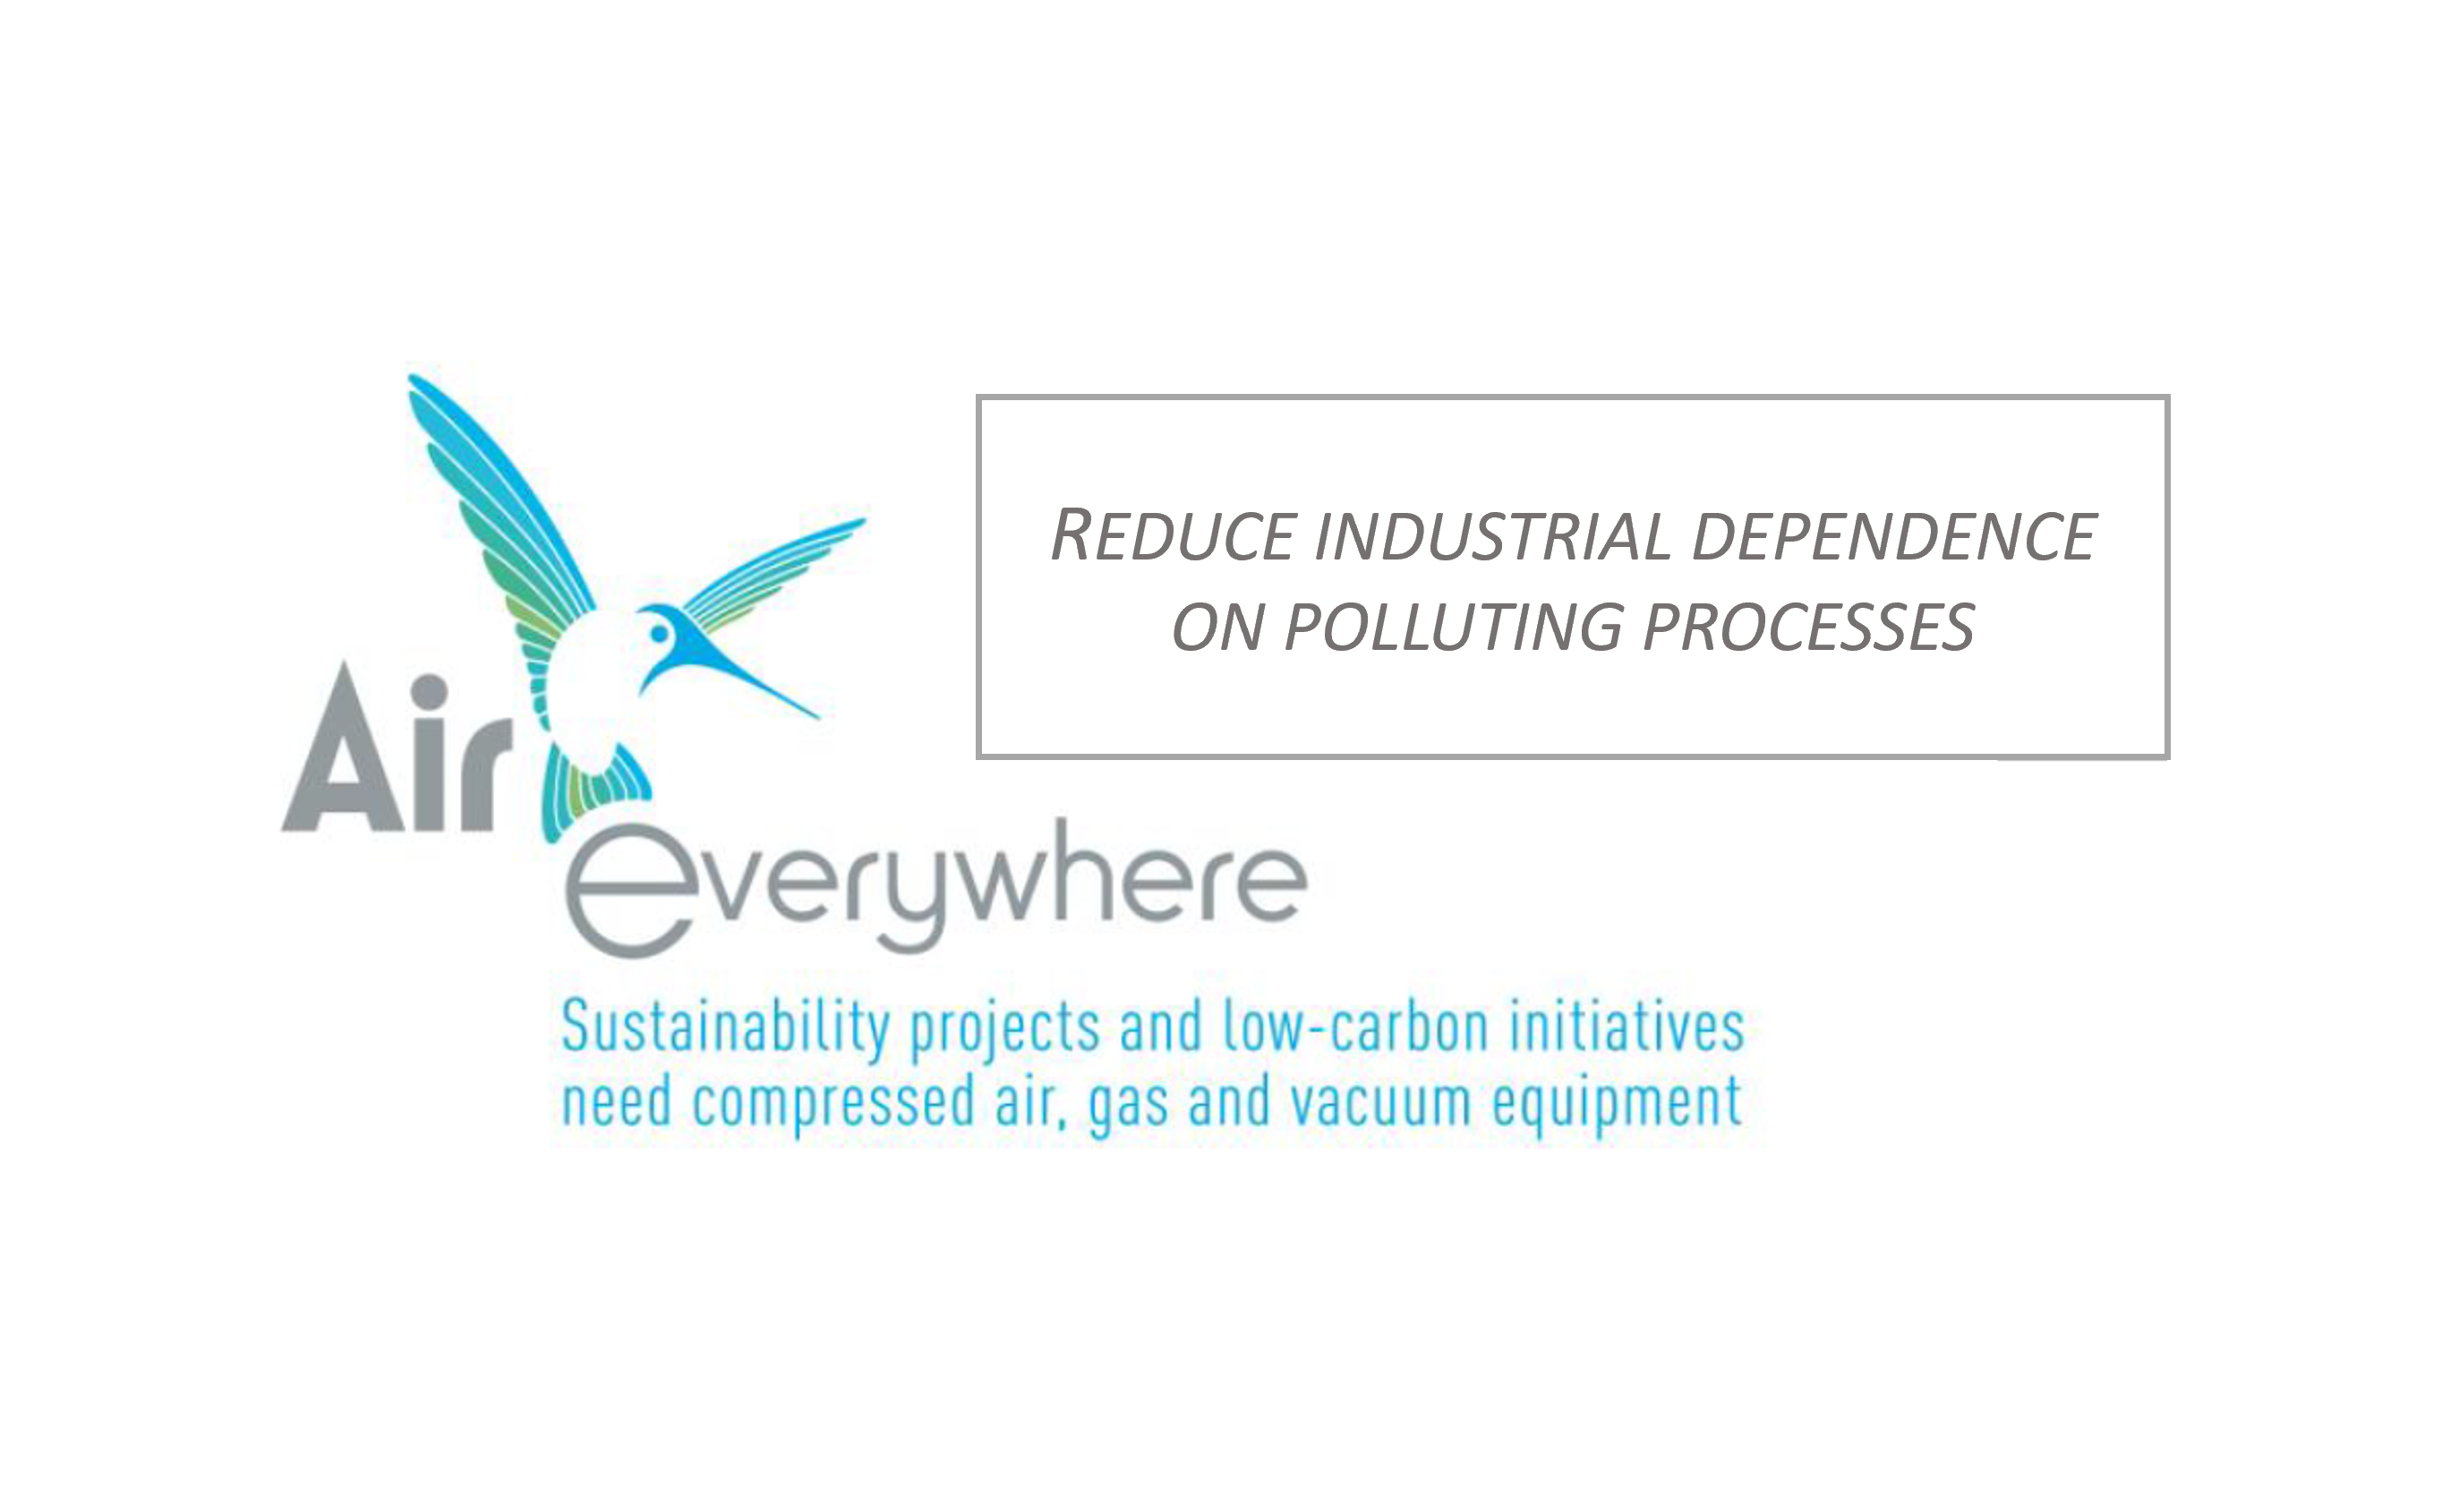 REDUCE INDUSTRIAL DEPENDENCE ON POLLUTING PROCESSES